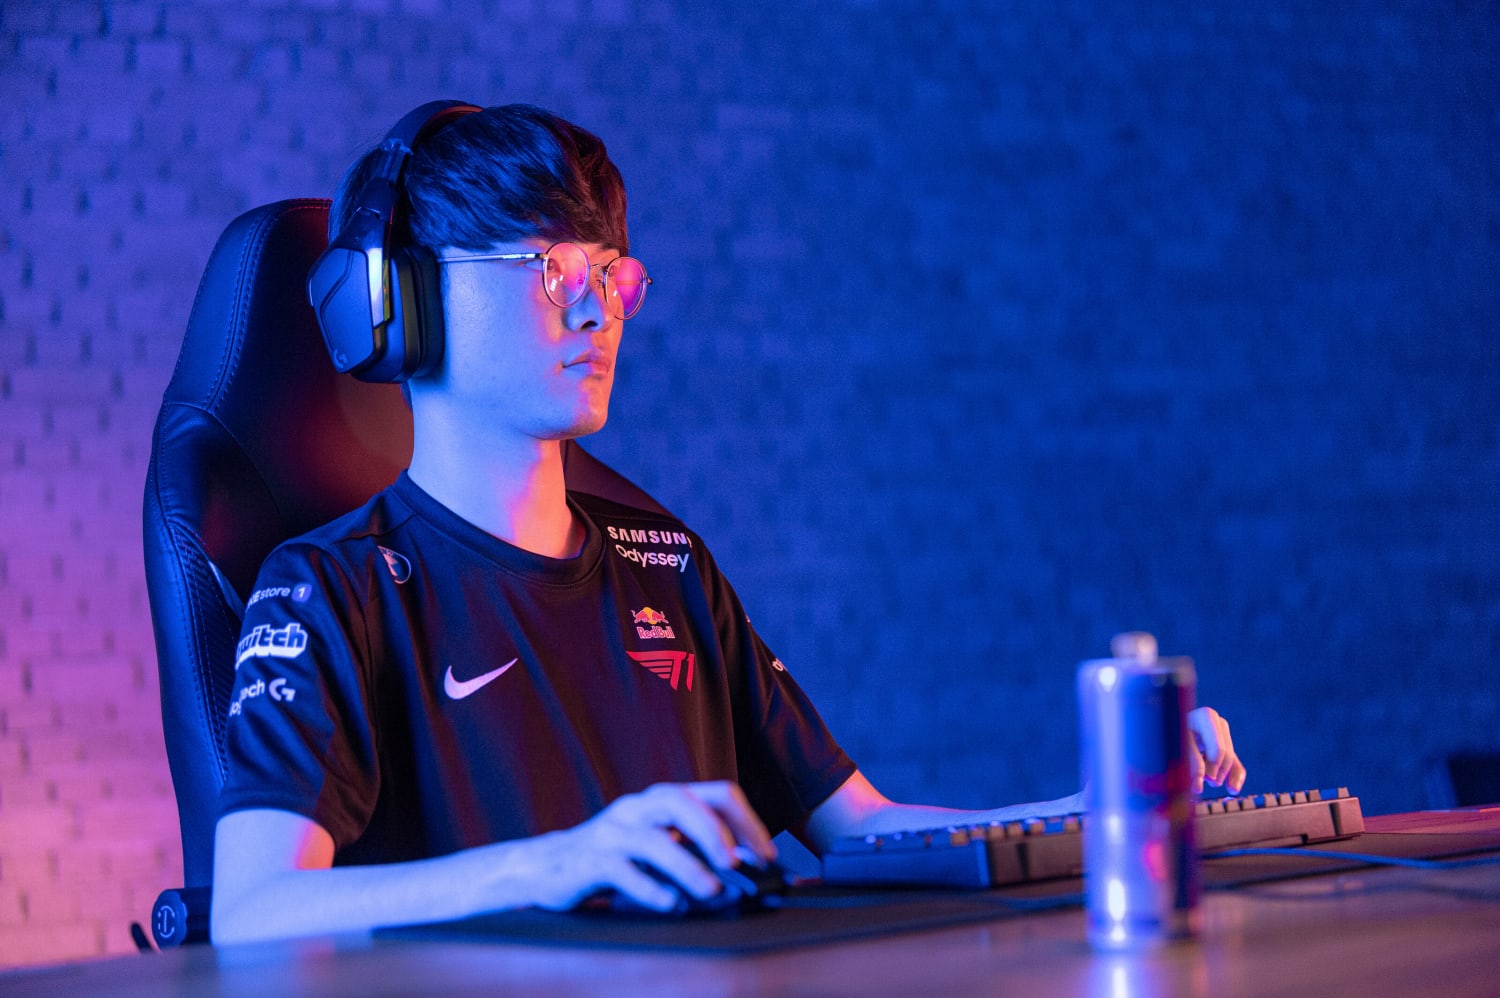 T1 Faker is finally playing League again after more than 2 weeks